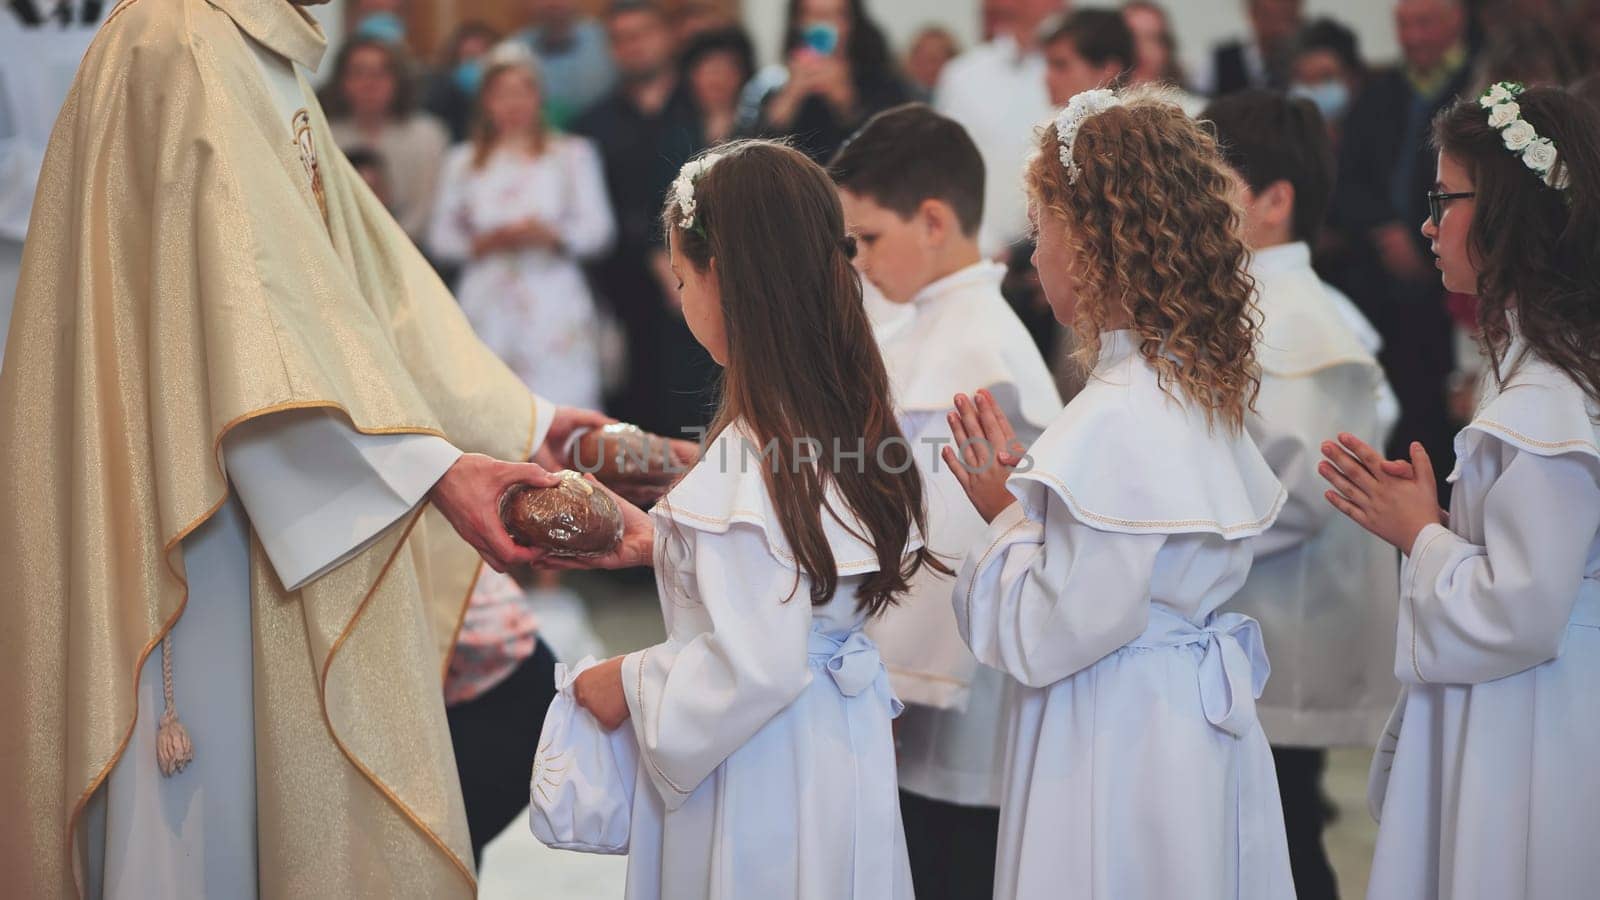 Children receive bread from the priest in the Catholic Church